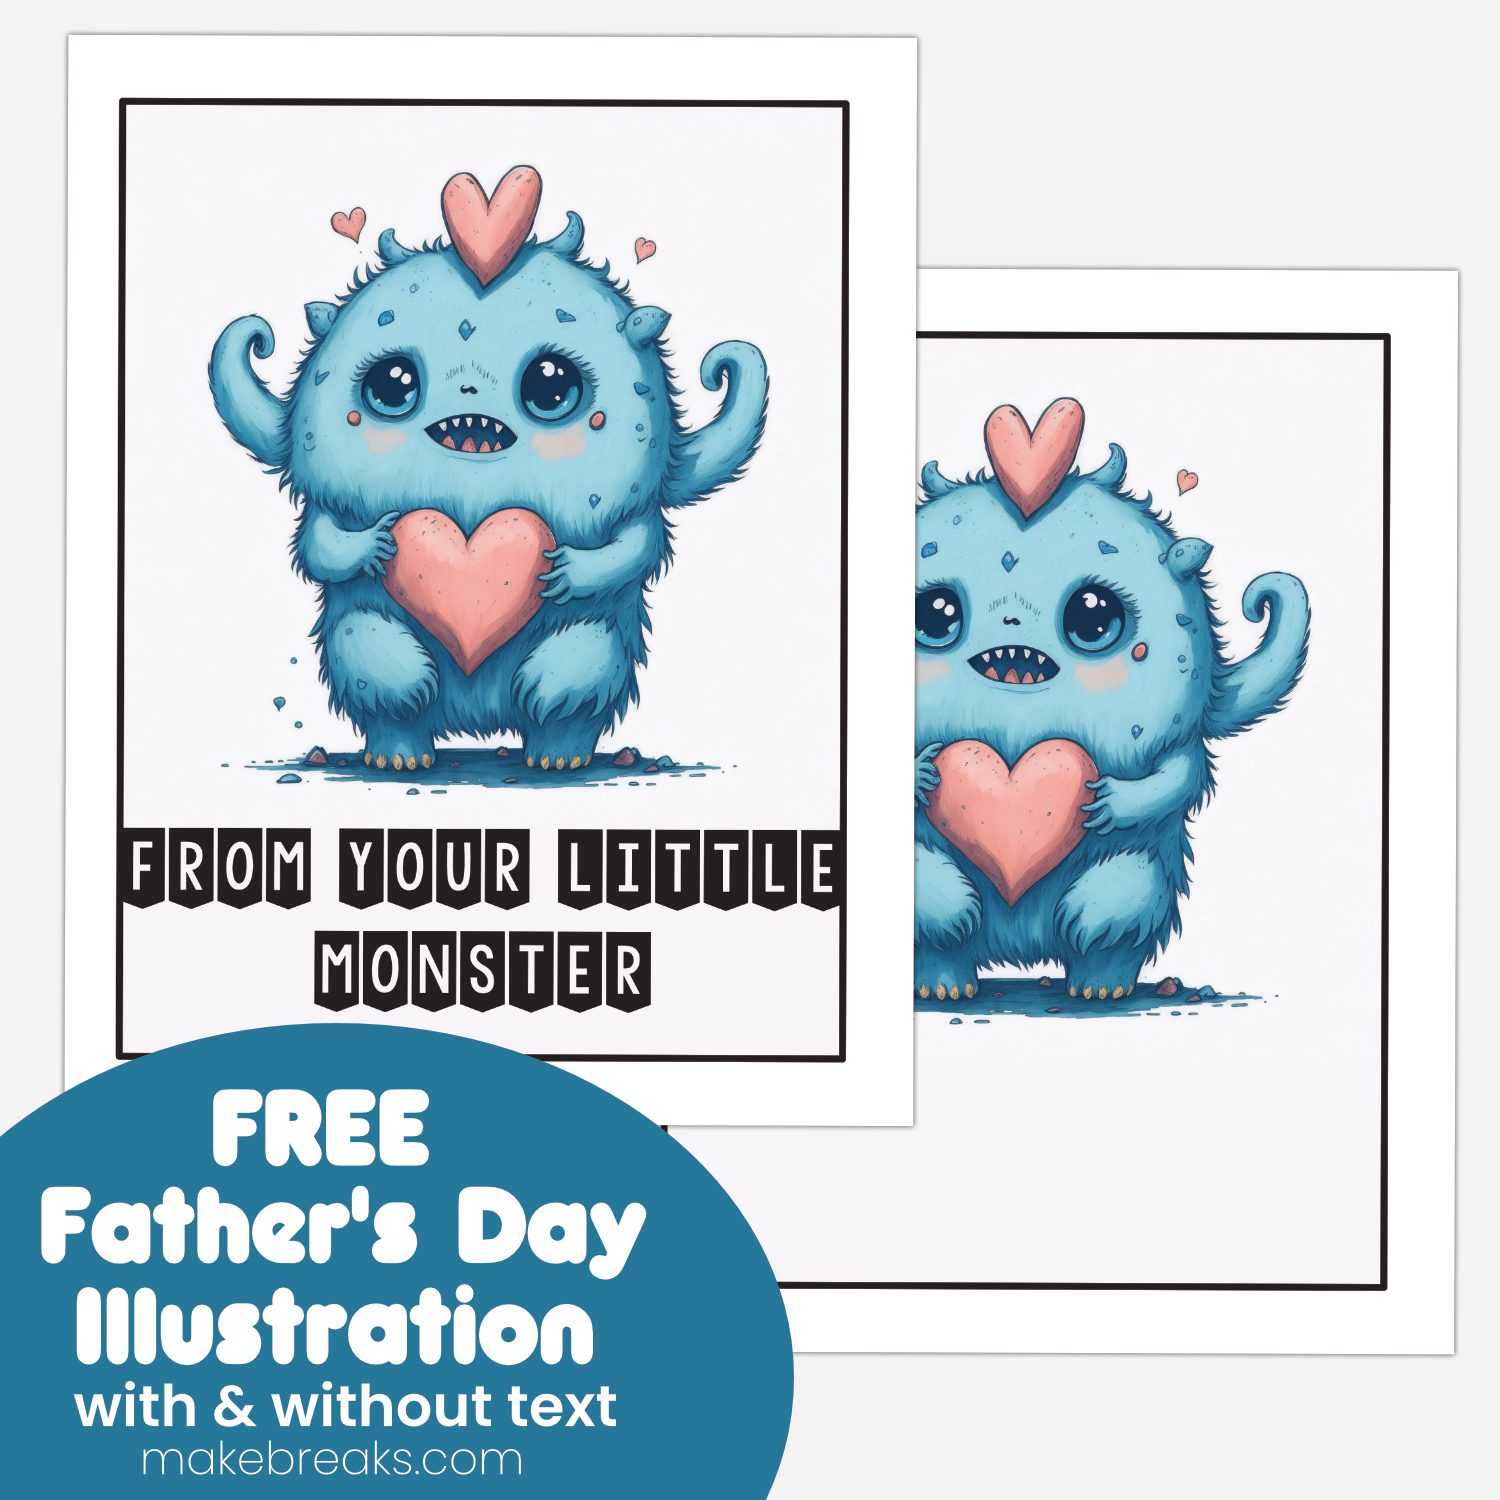 Free Printable Father’s Day Illustration – Monster with Heart